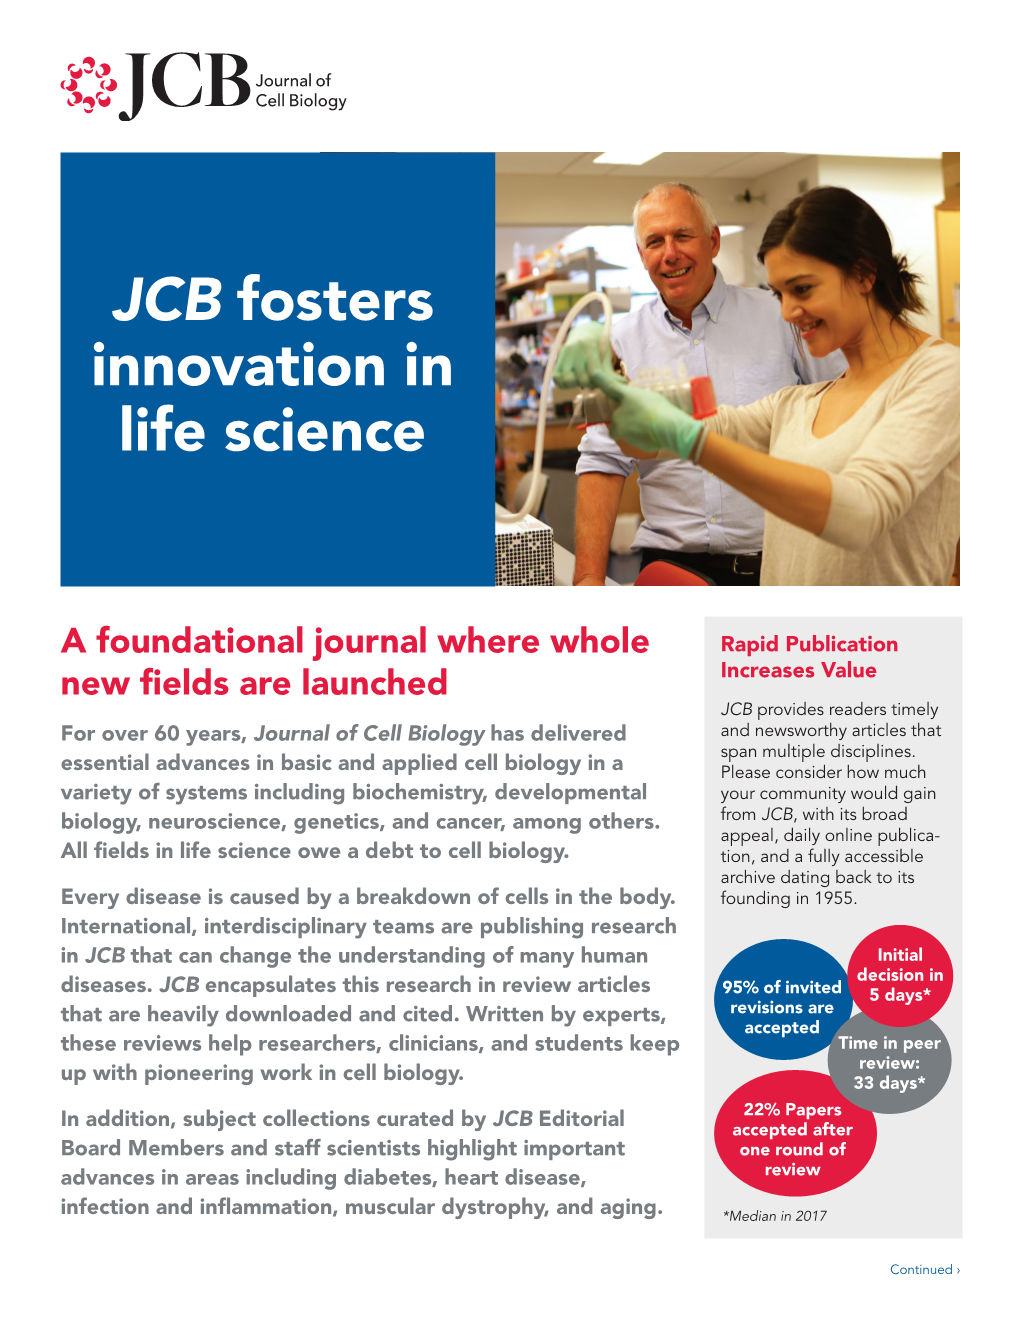 JCB Fosters Innovation in Life Science